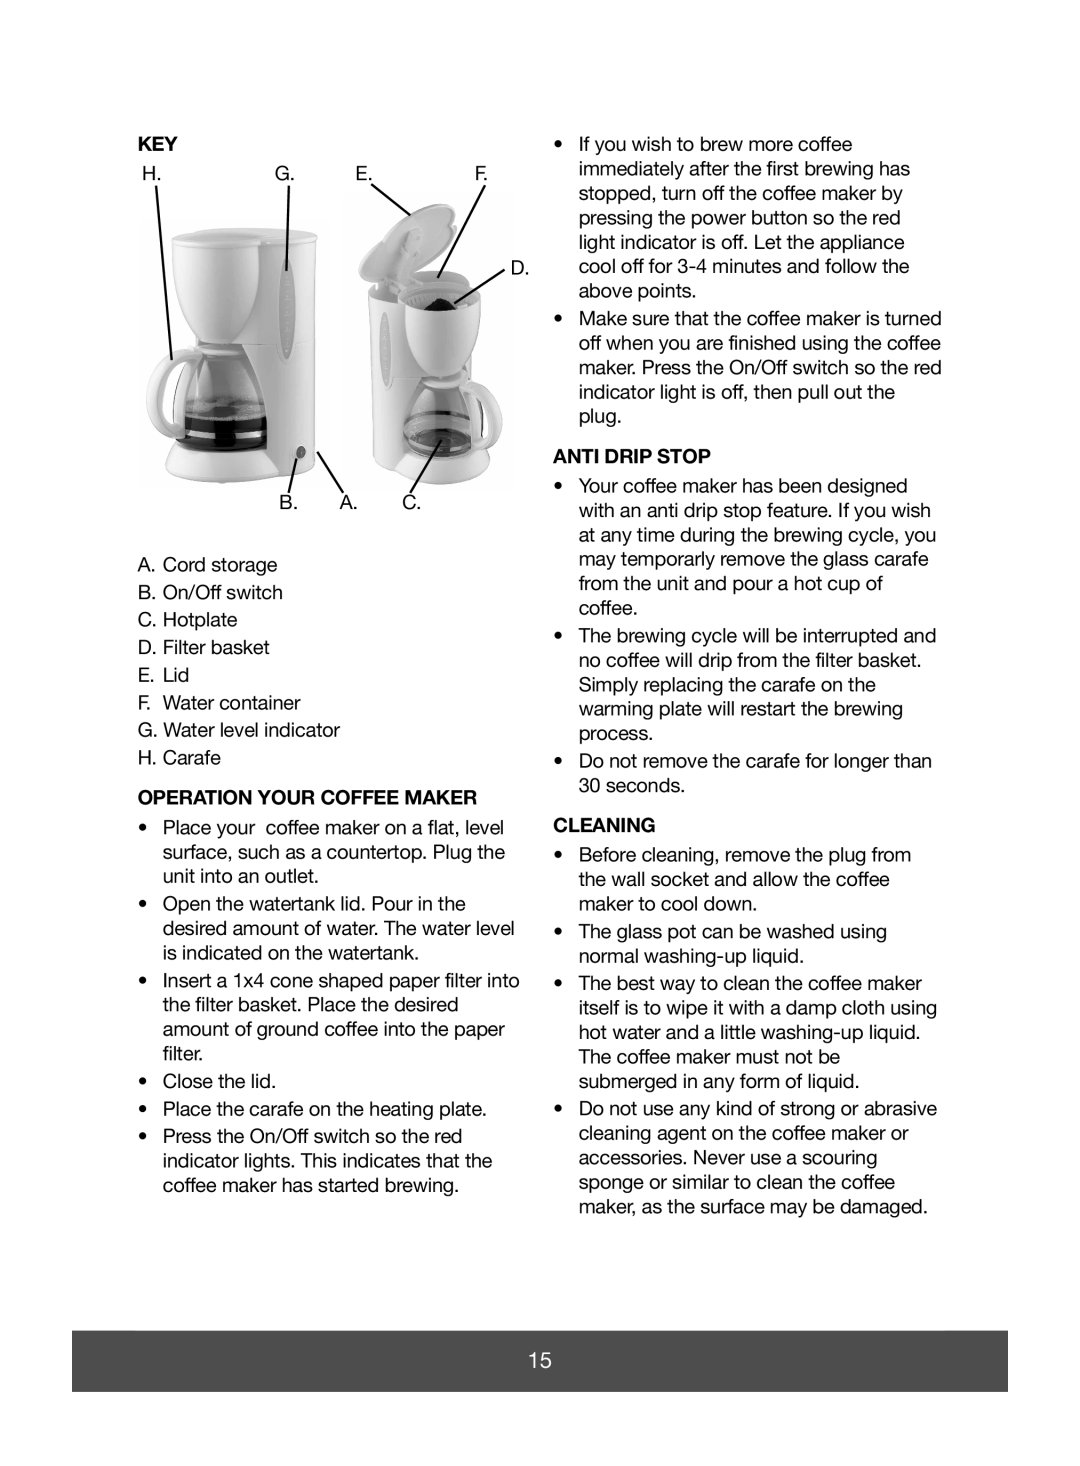 Butler 645-069, 645-067 manual Anti Drip Stop, Operation Your Coffee Maker, Cleaning 